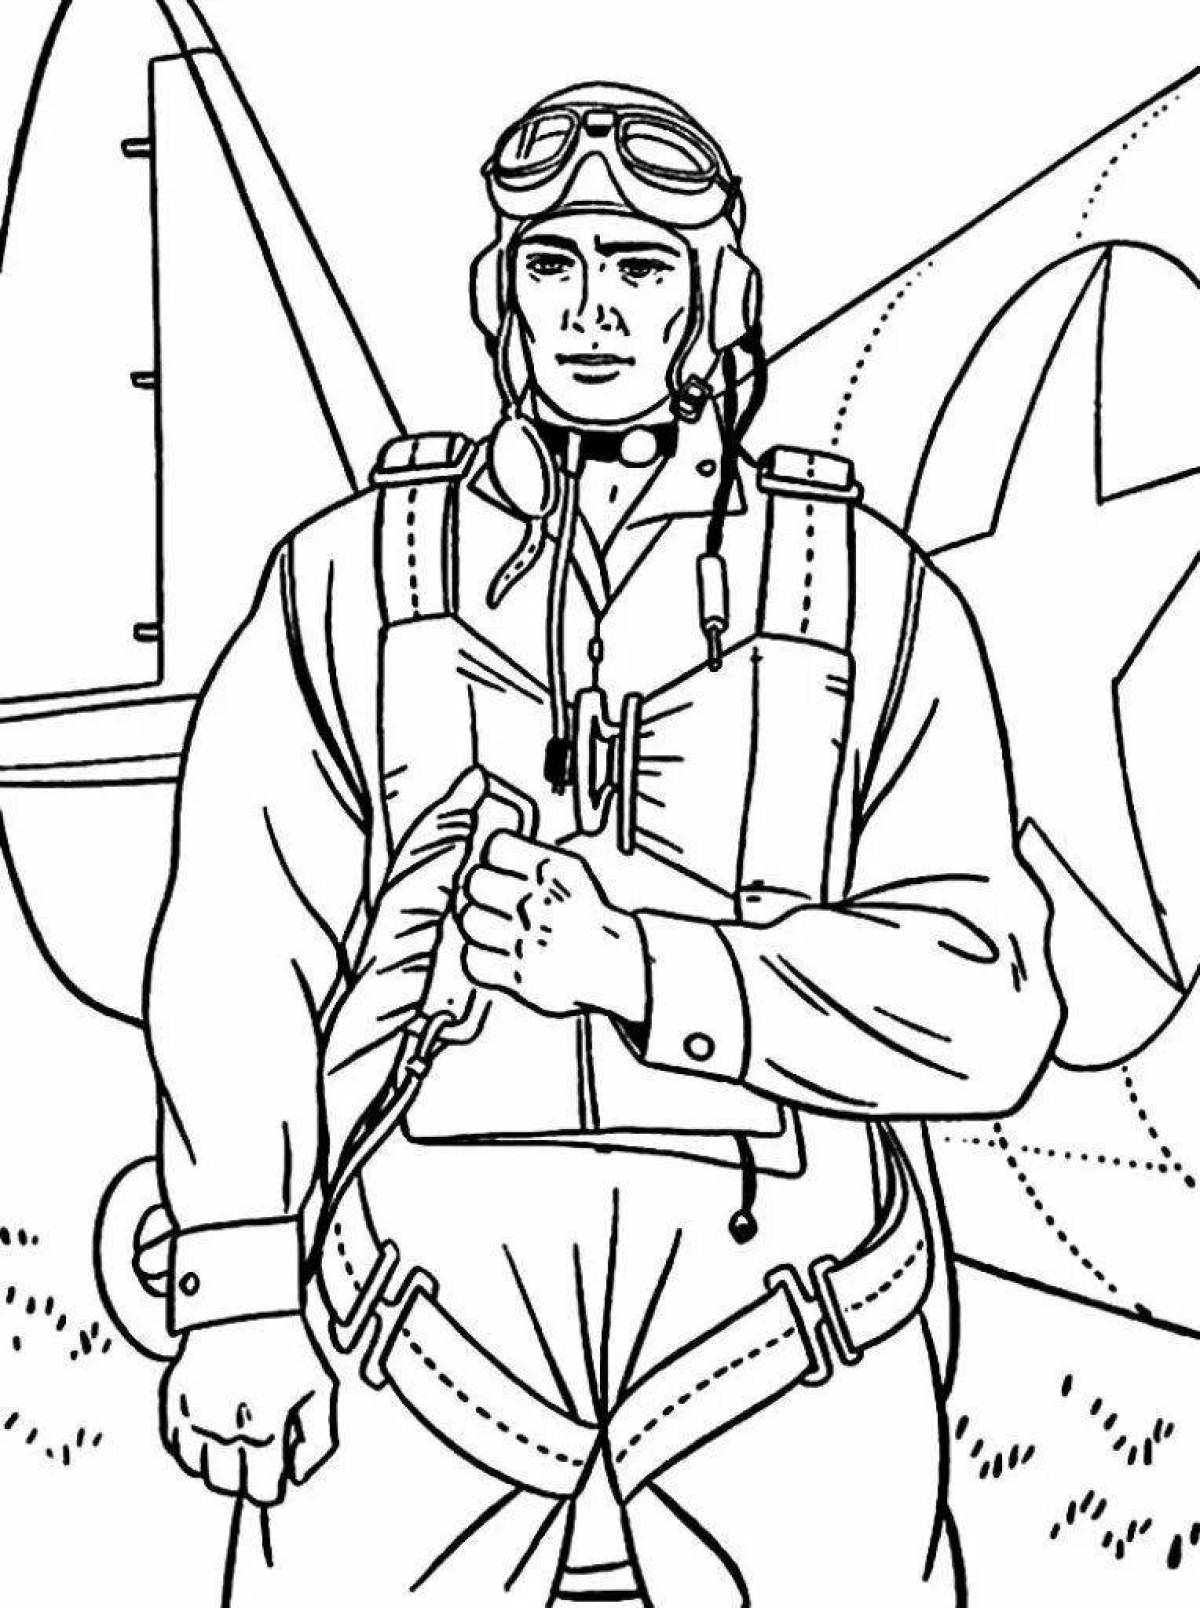 Great pilot coloring book for kids